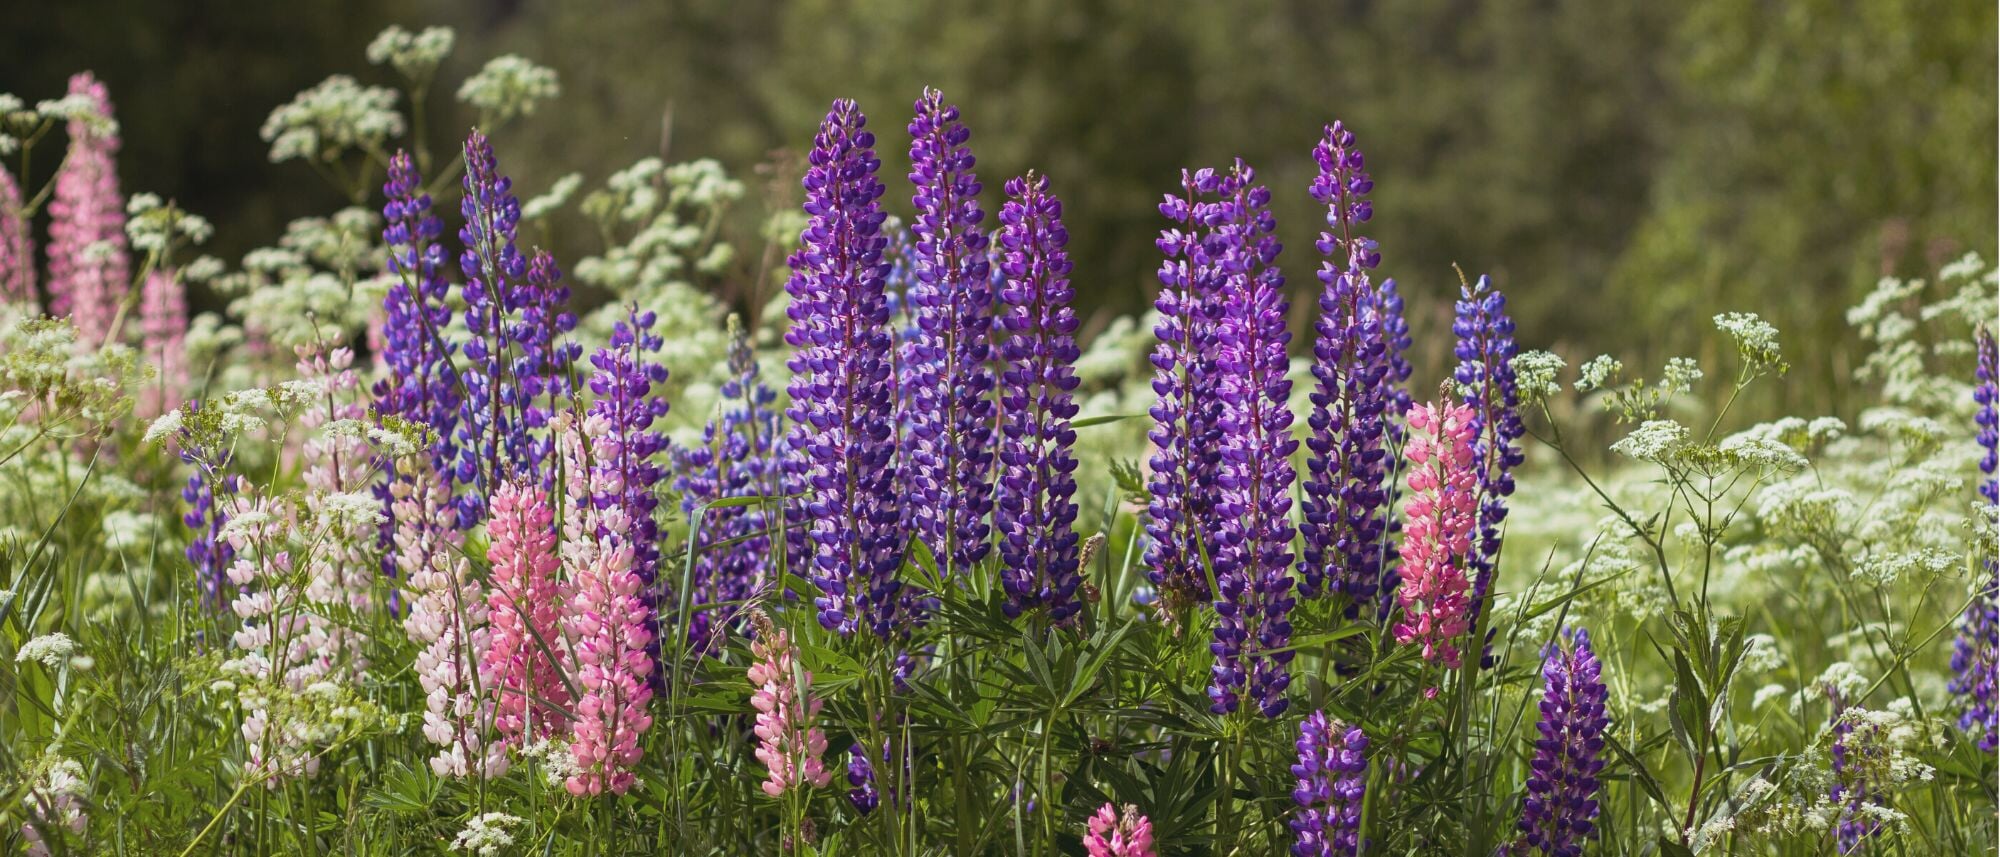 Purple pink and white lupine flowers growing in the garden